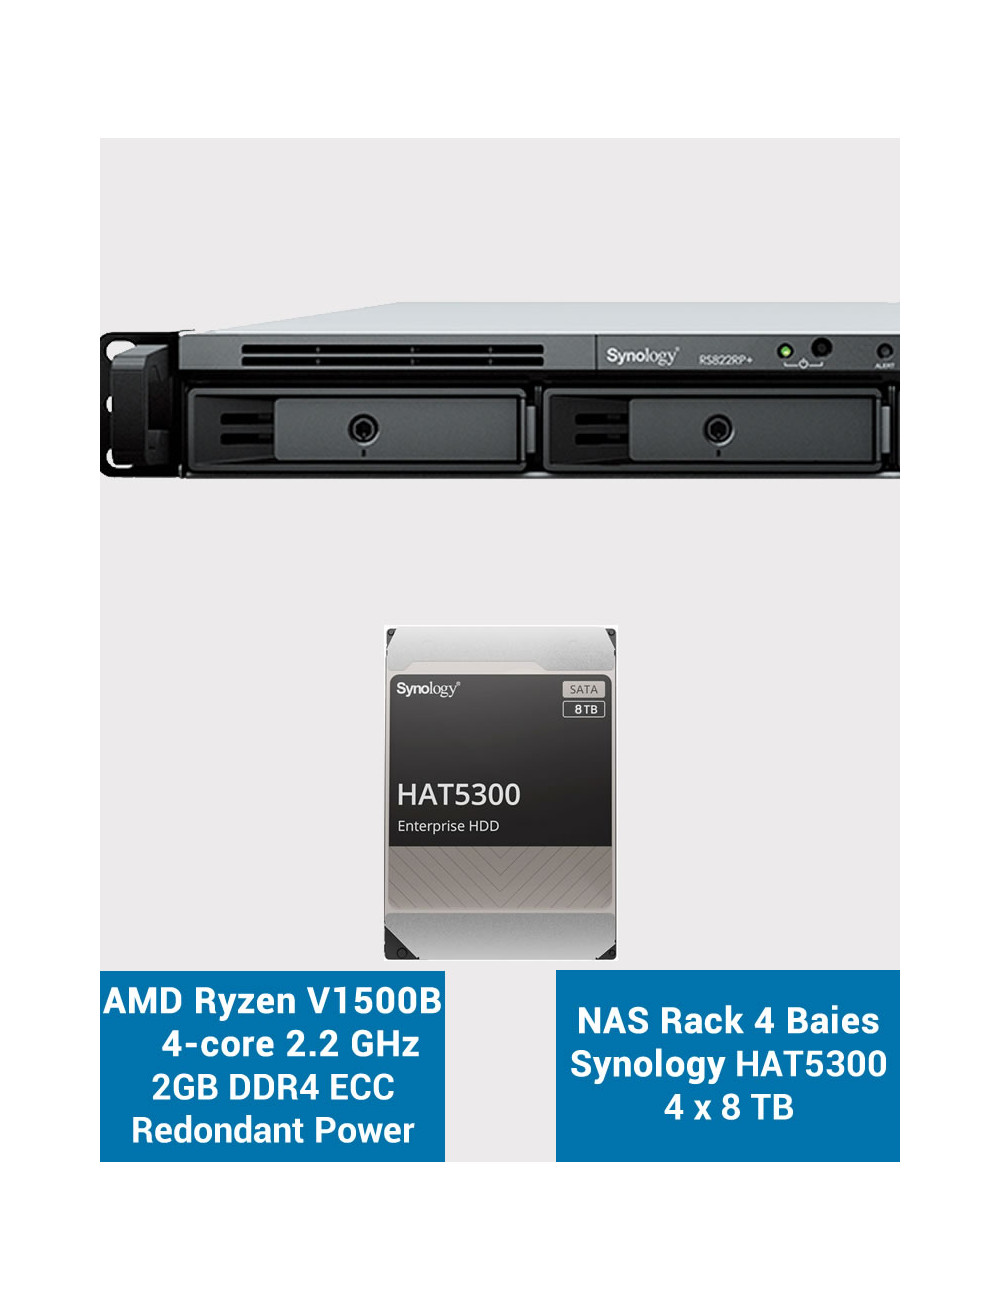 RS822RP+ 2Go Serveur NAS Rack 1U HAT5300 32To (4x8To)